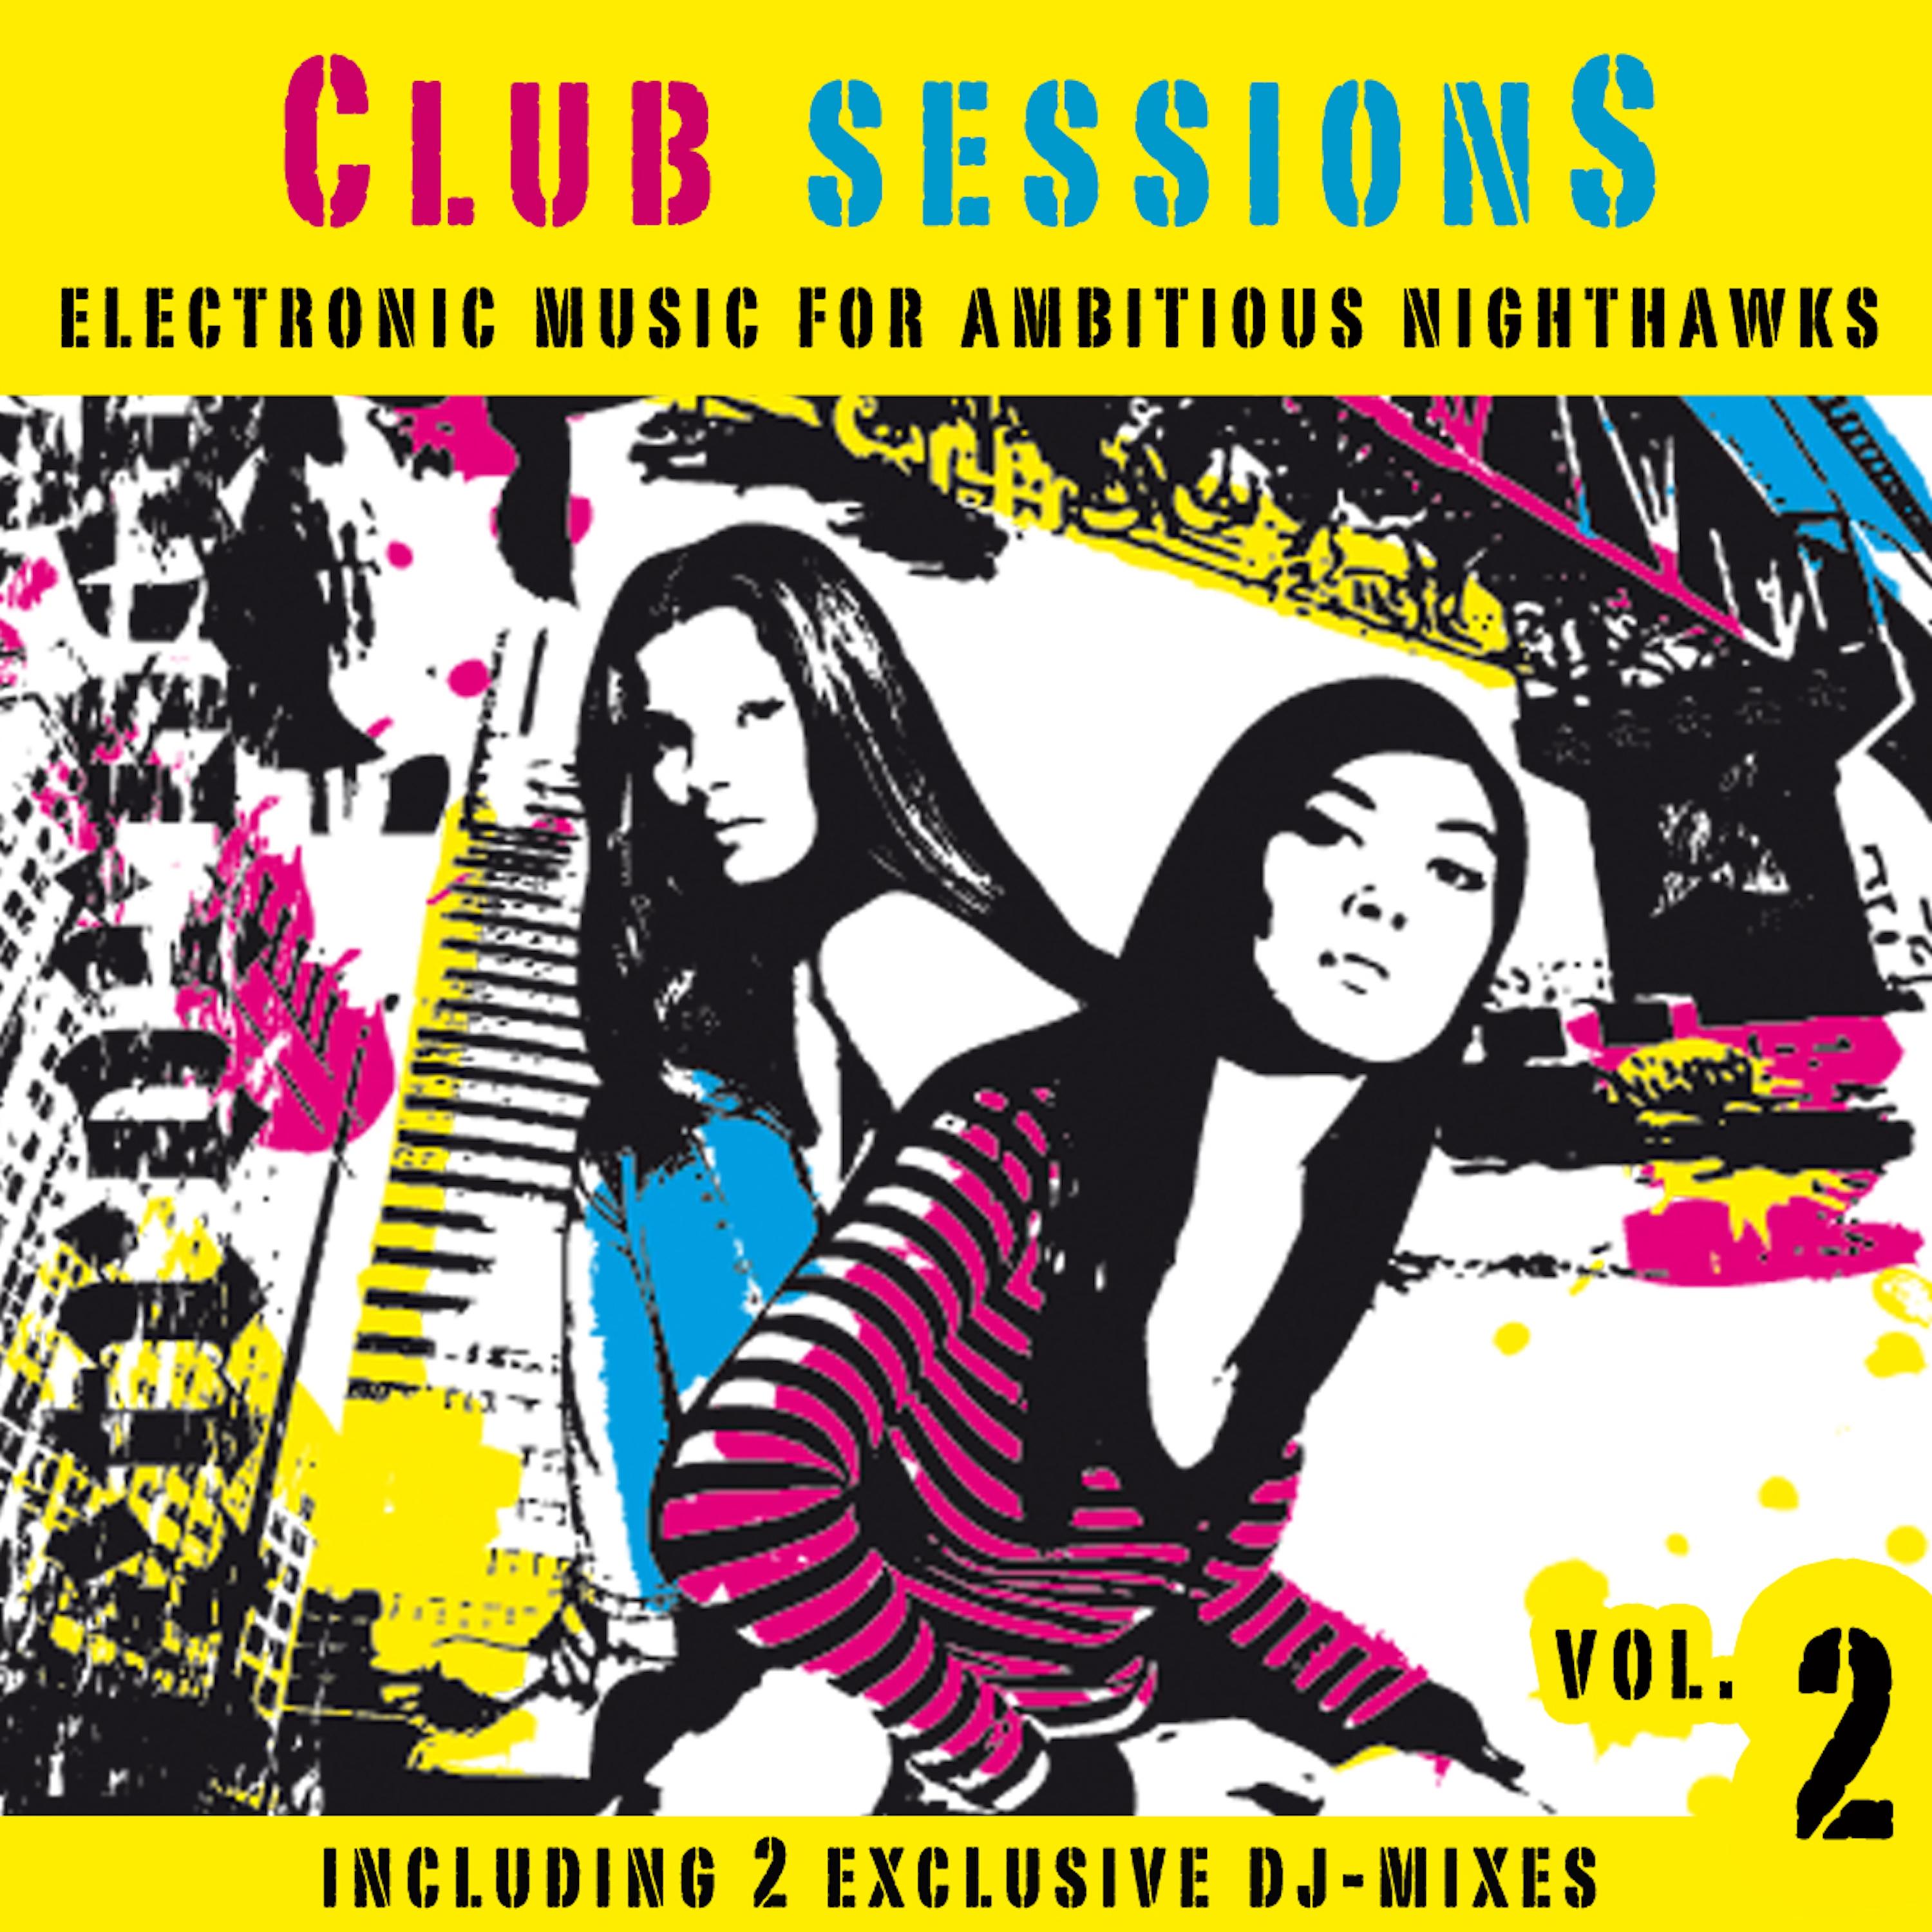 Club Sessions Vol. 2 - Music For Ambitious Nighthawks